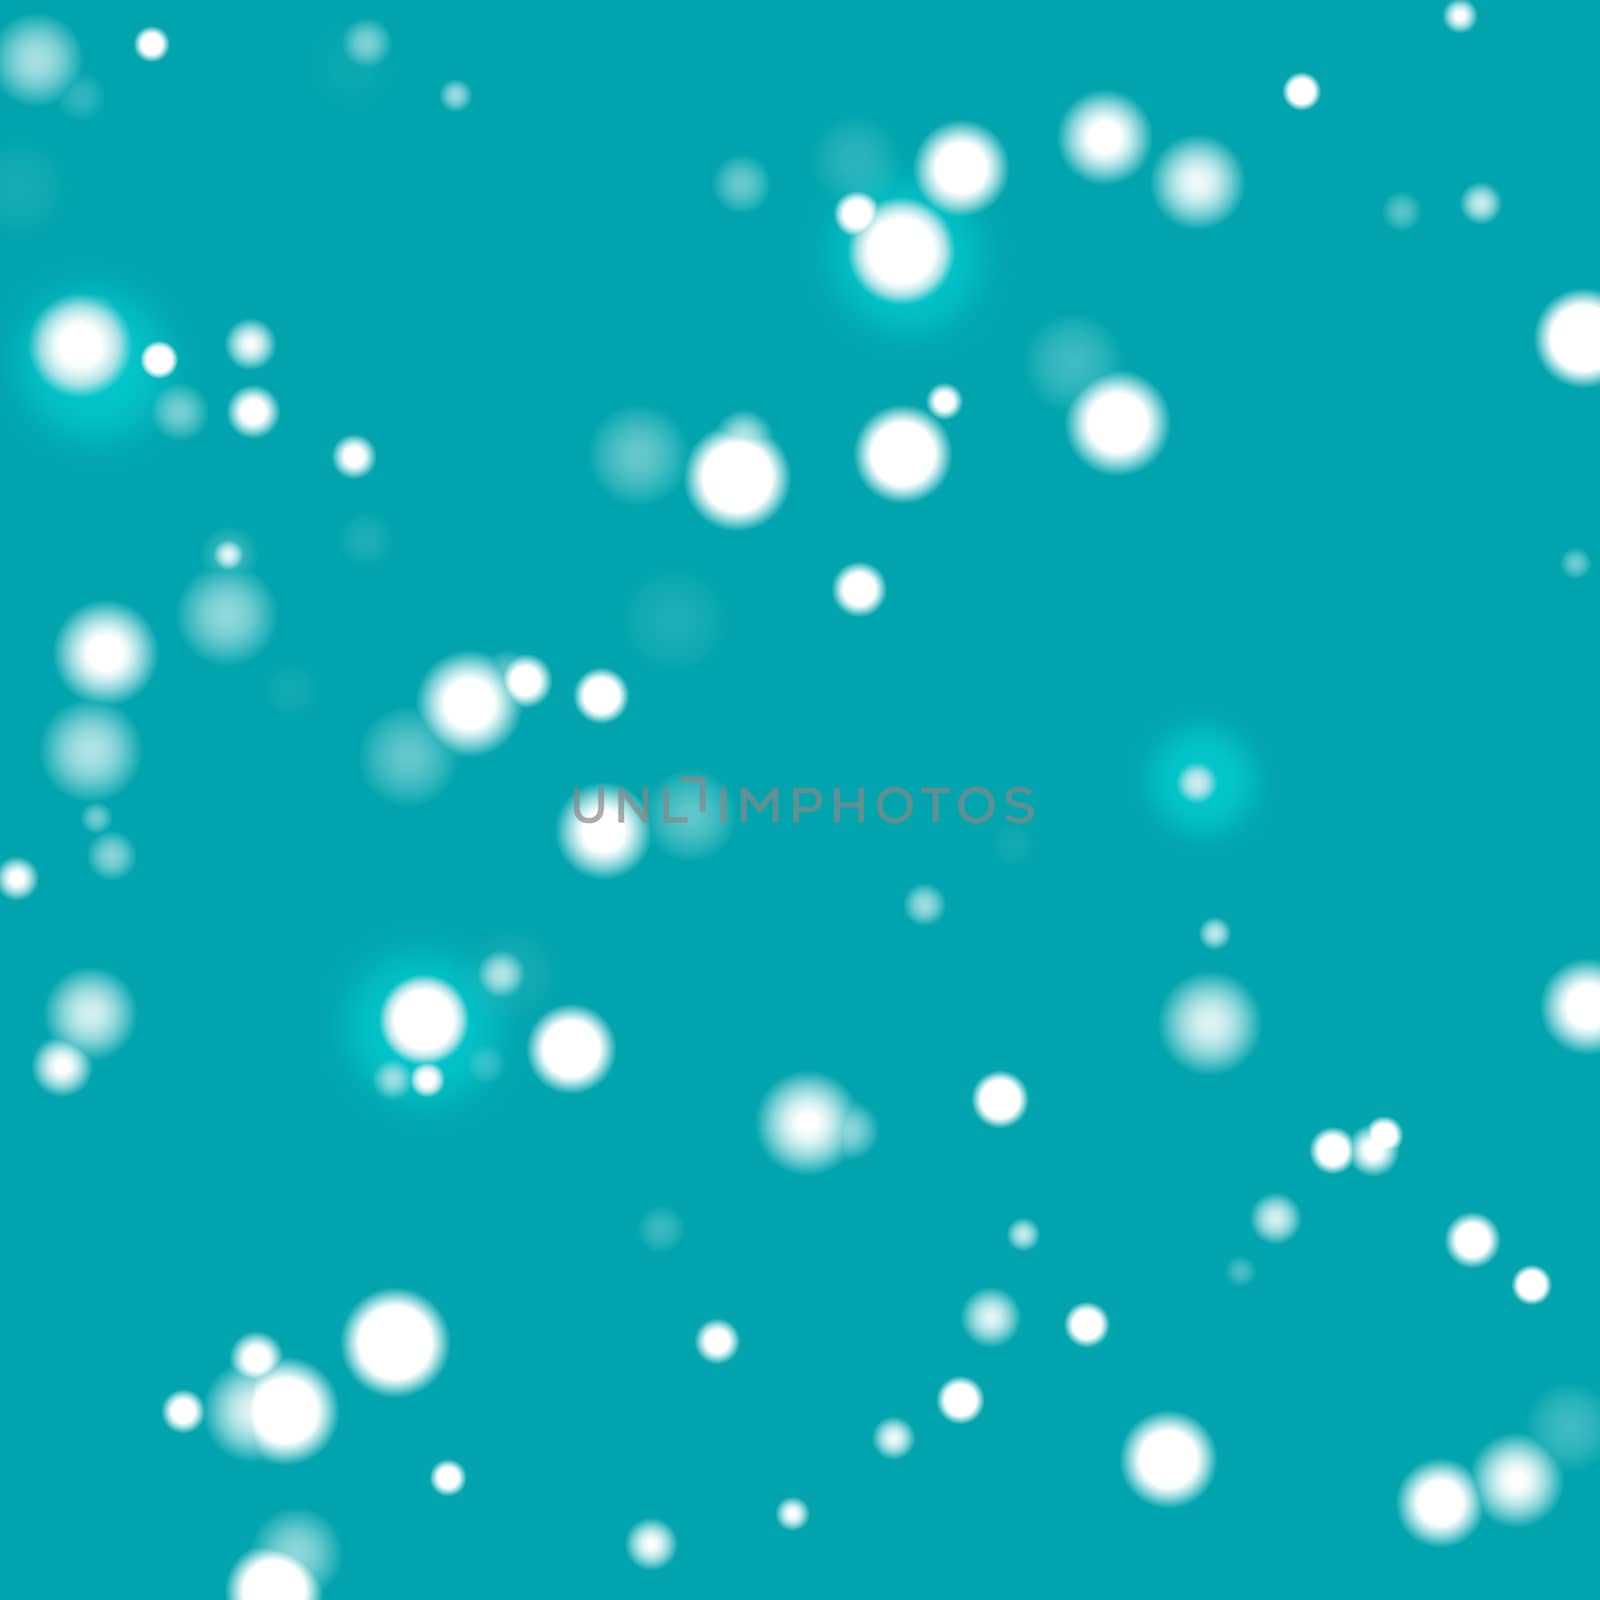 Falling snow effect with abstract green background